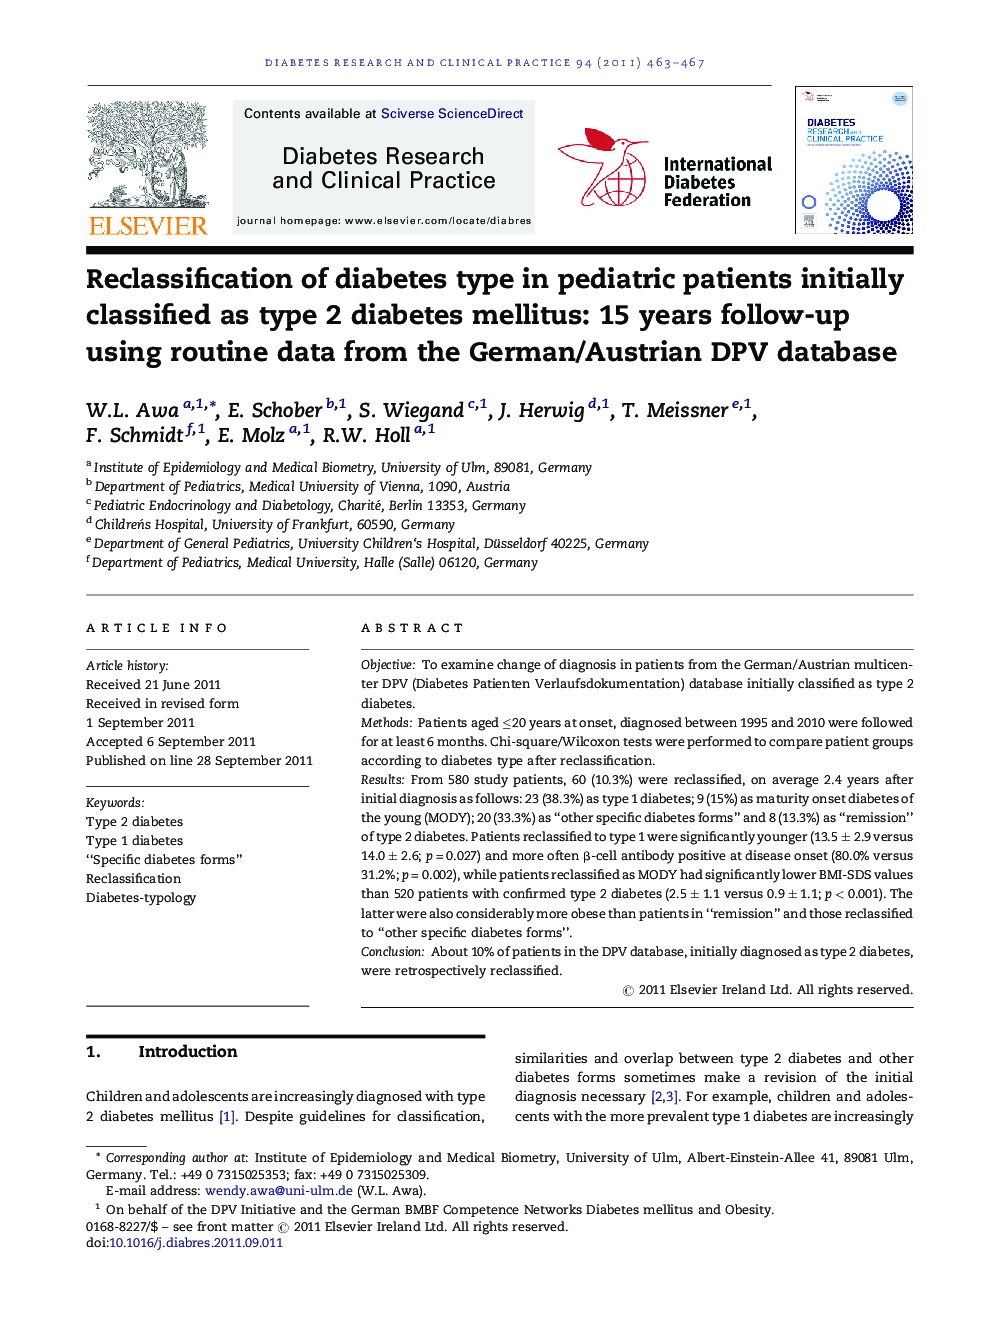 Reclassification of diabetes type in pediatric patients initially classified as type 2 diabetes mellitus: 15 years follow-up using routine data from the German/Austrian DPV database